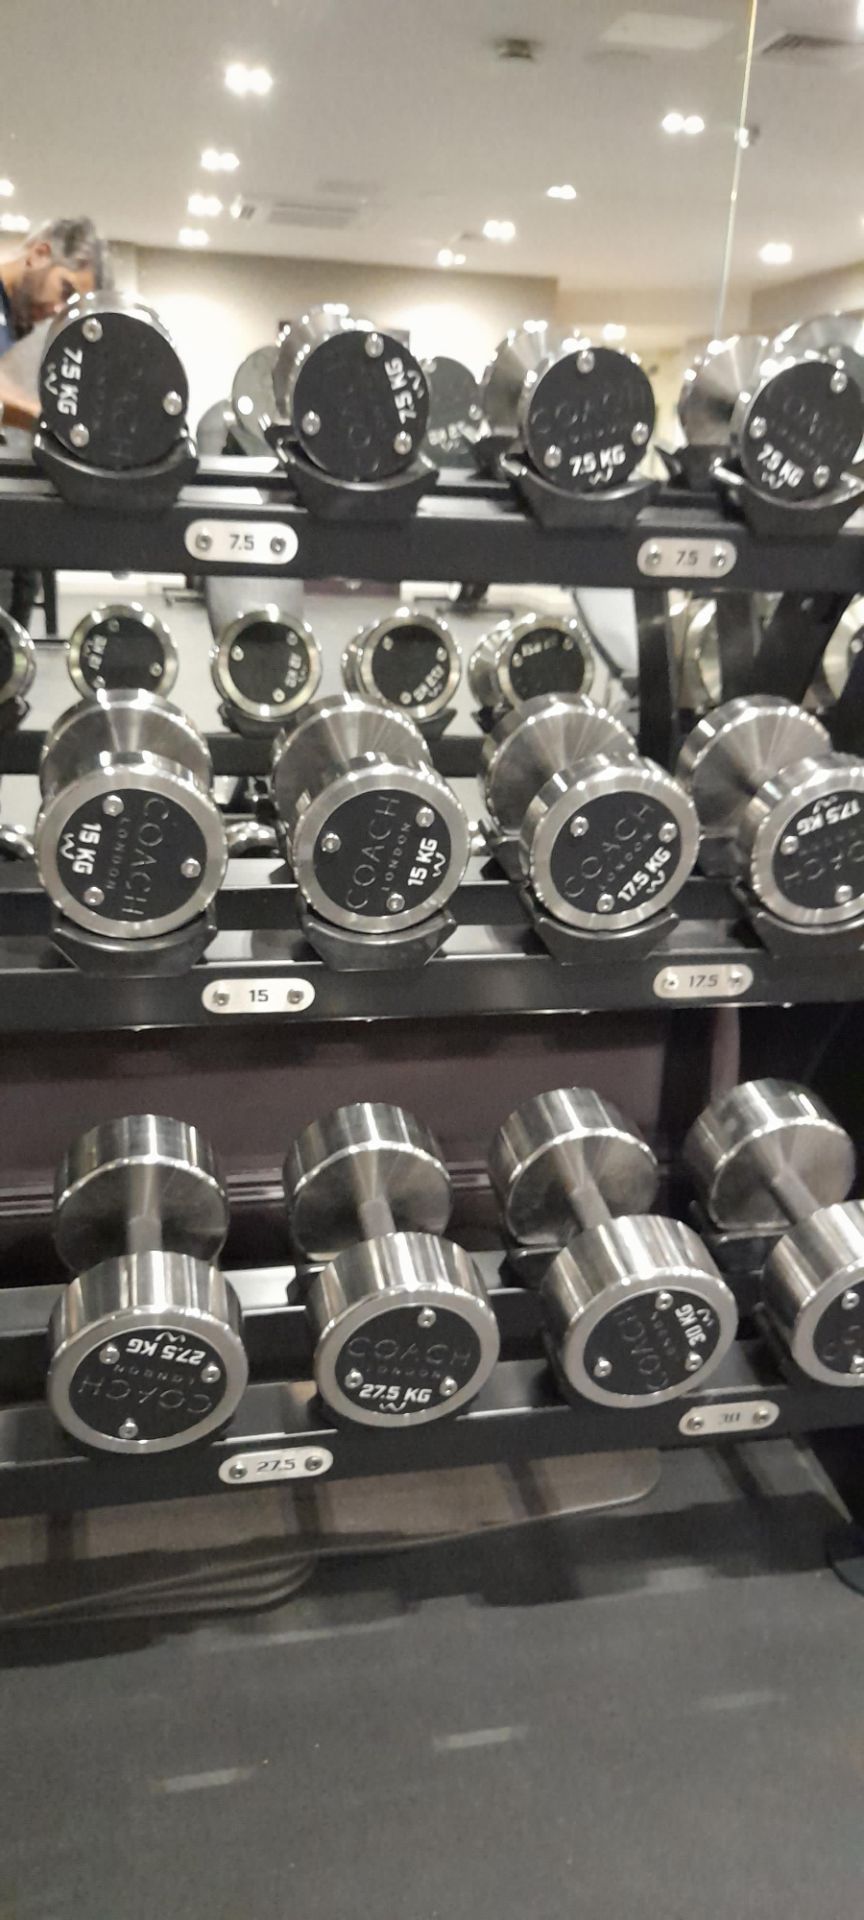 3 Tier steel fabricated dumbbell rack with 15 pairs of dumbbell weights from 2.5kg - 30kg and 3 Tier - Image 4 of 4